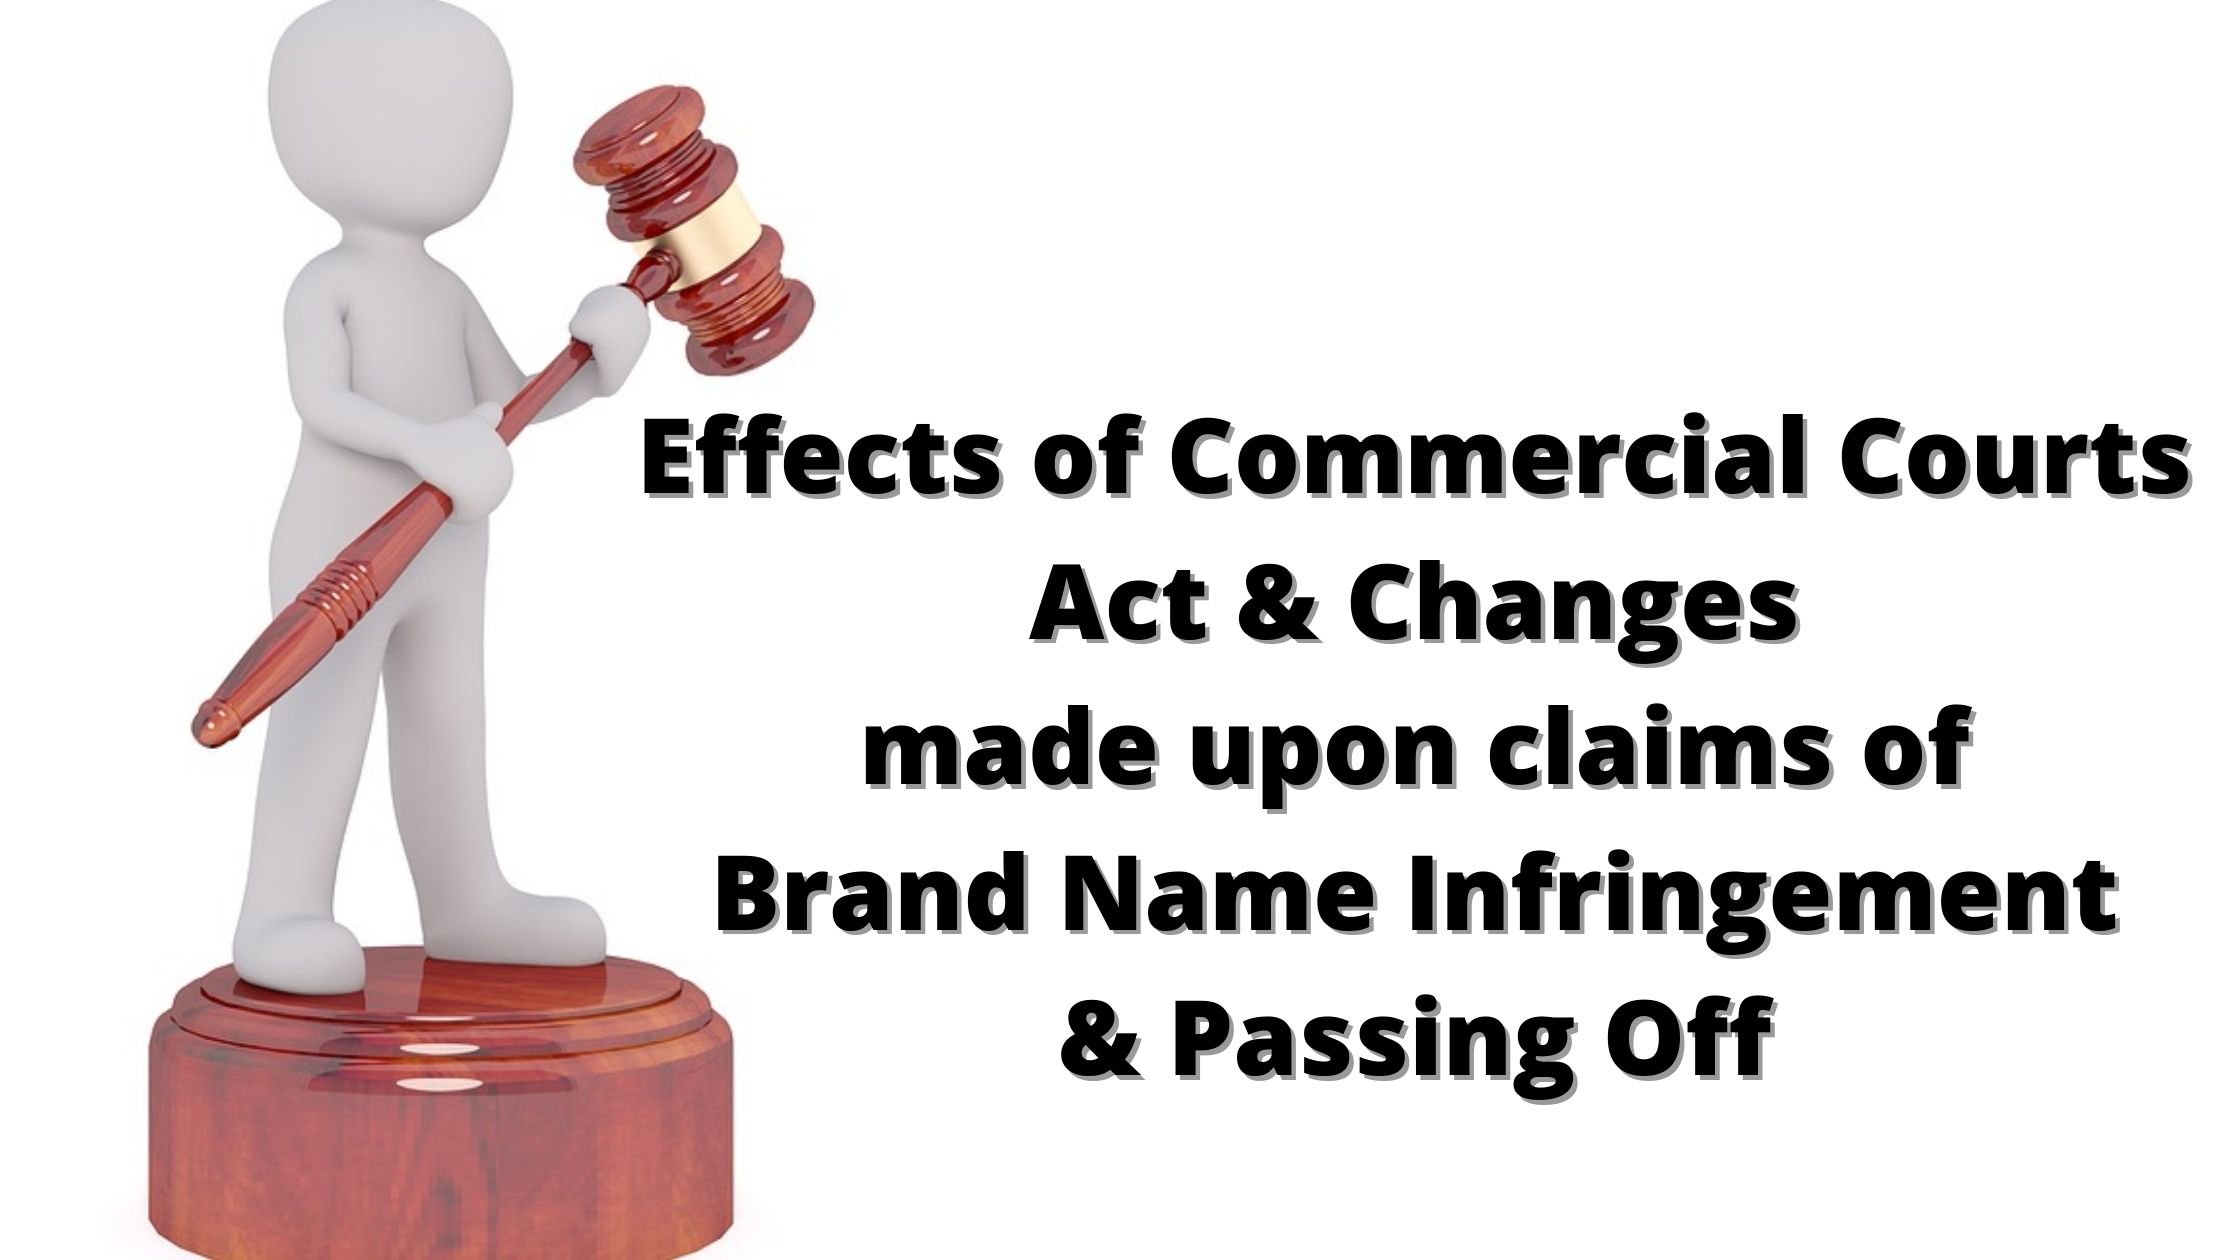 Effects of the Commercial Courts Act and Changes made upon claims of Brand Name Infringement and Passing Off